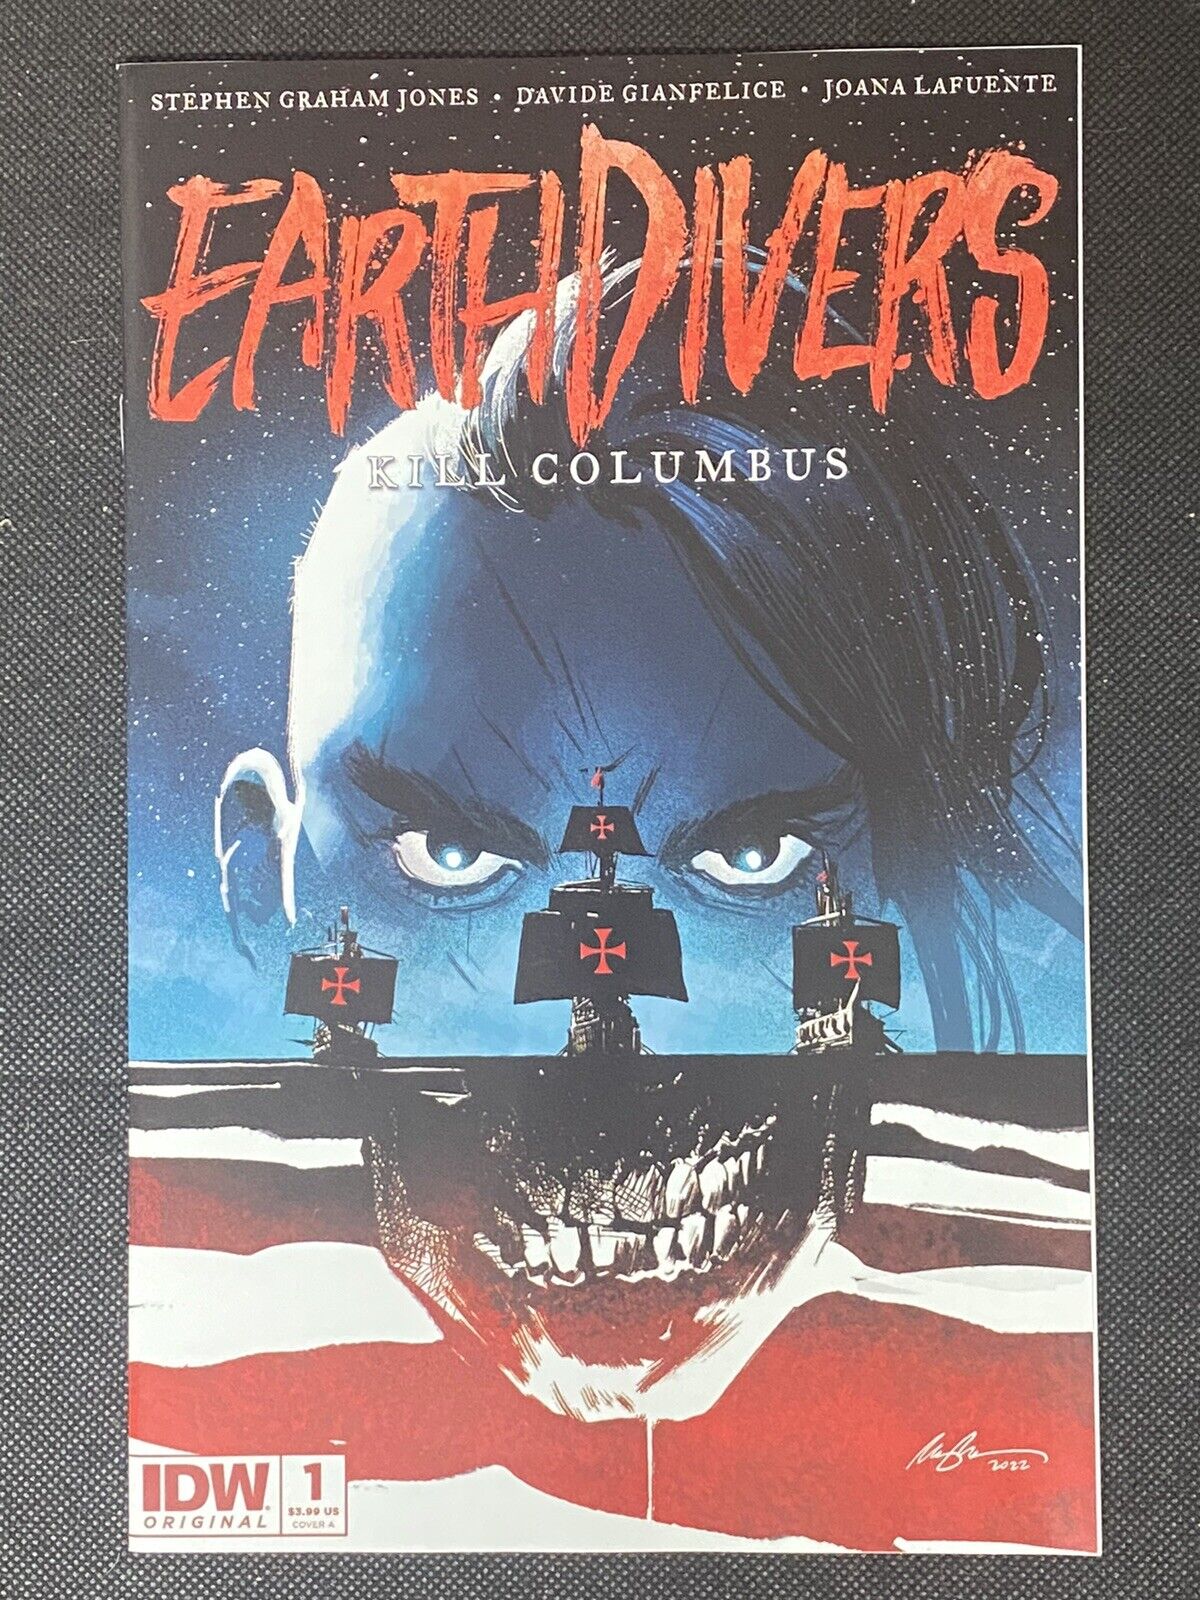 Earthdivers #1 (IDW 2022) Cover A * NM * Optioned for TV Show